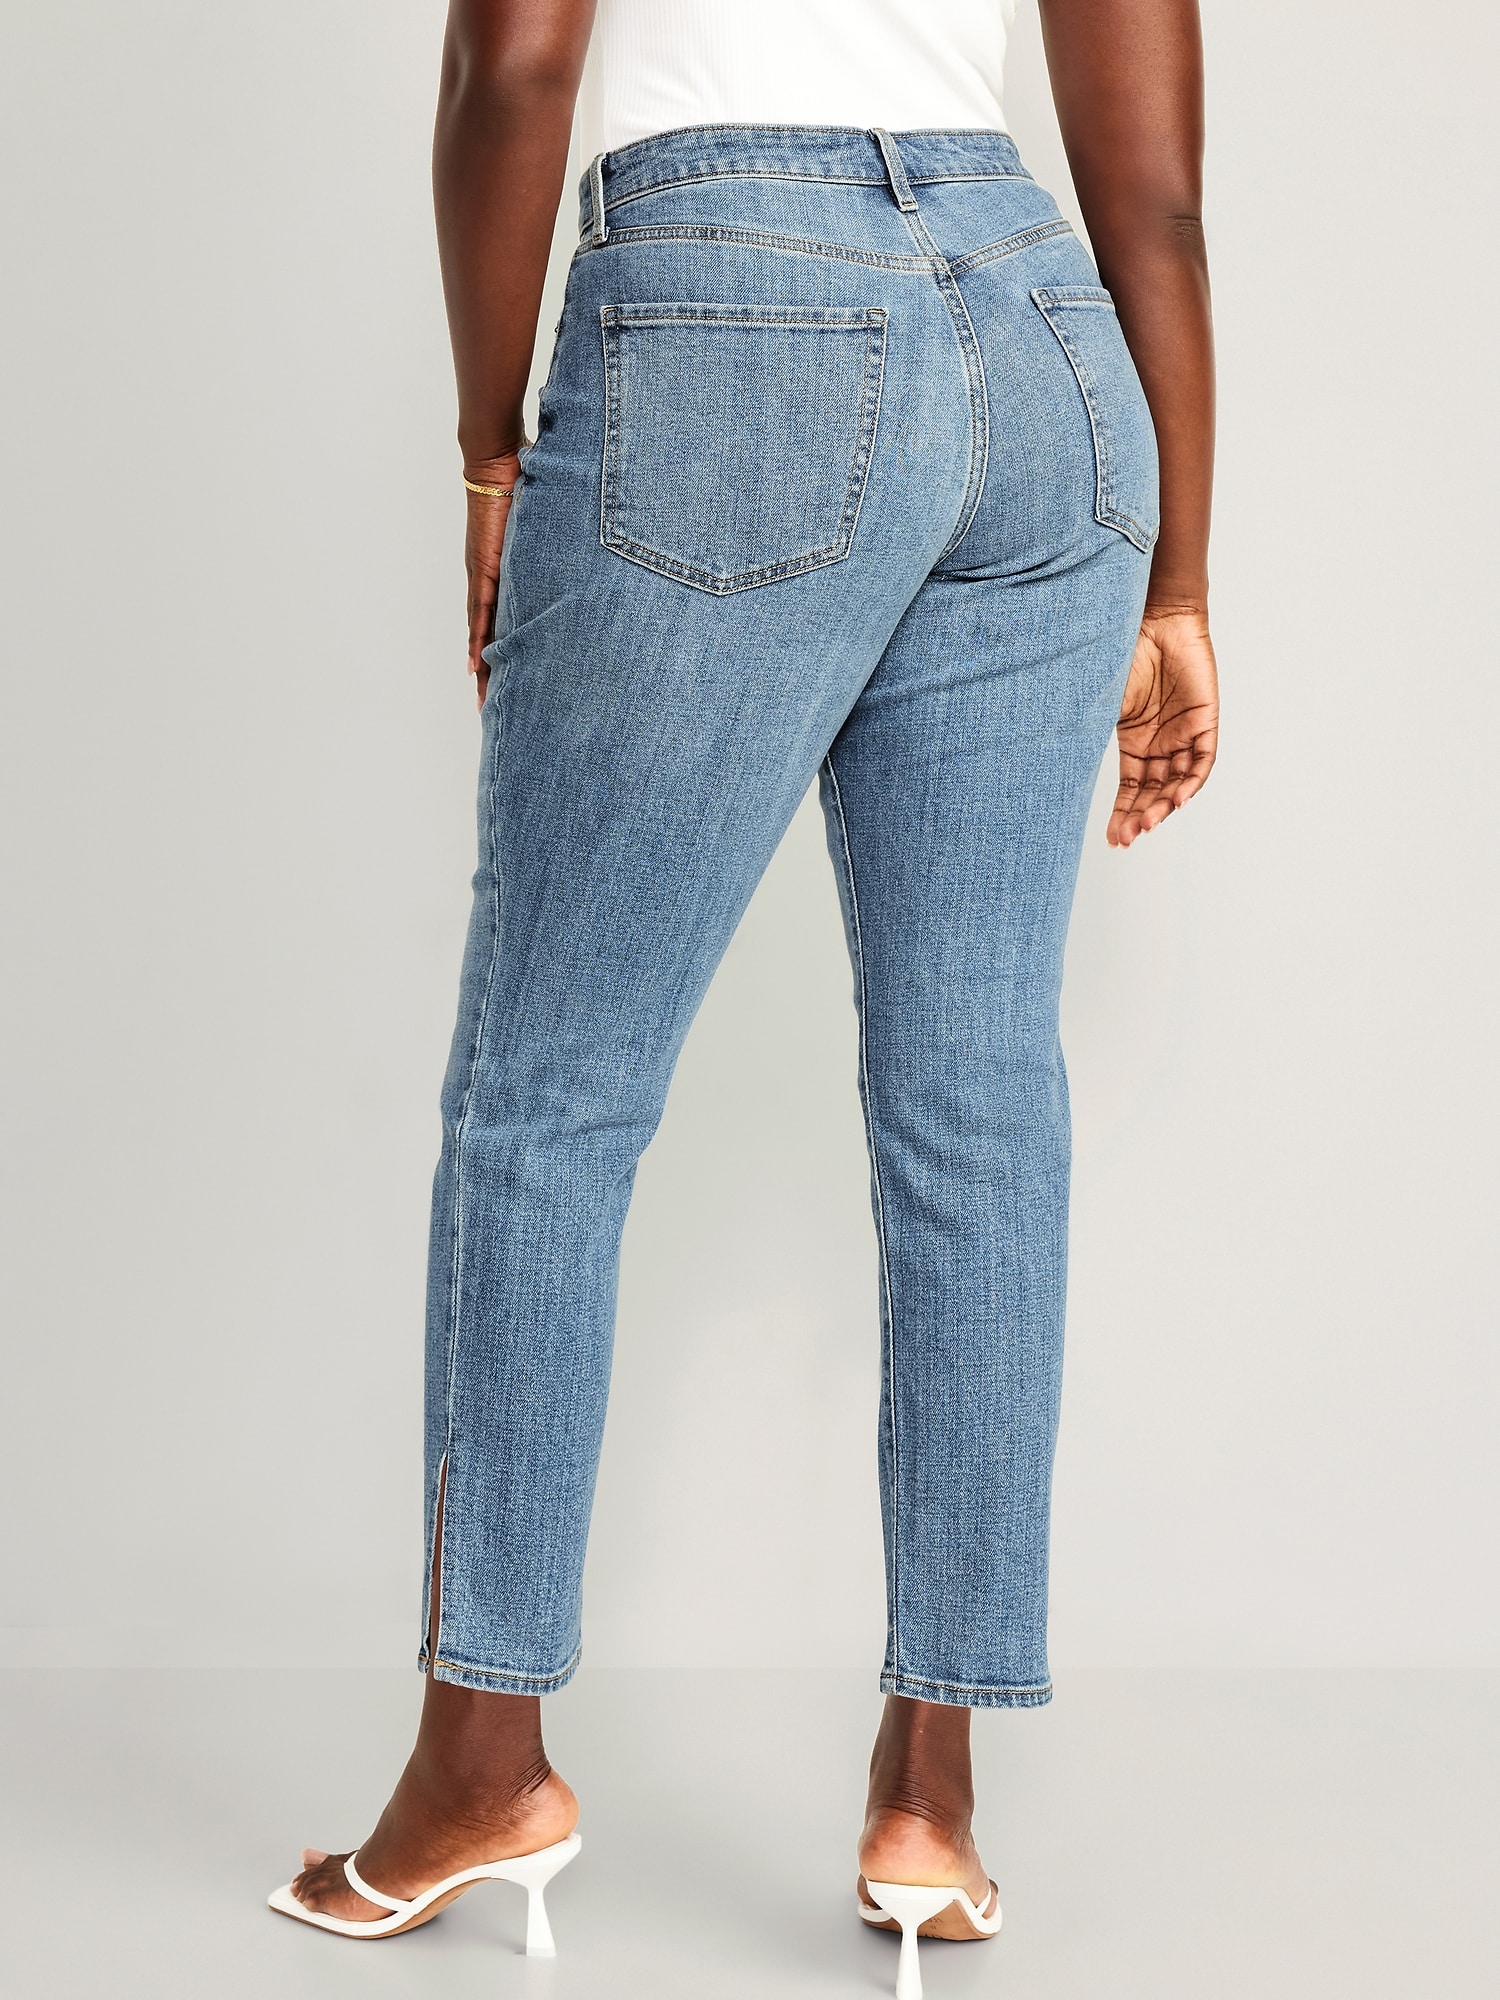 H&M+ Curvy High Ankle Jeggings